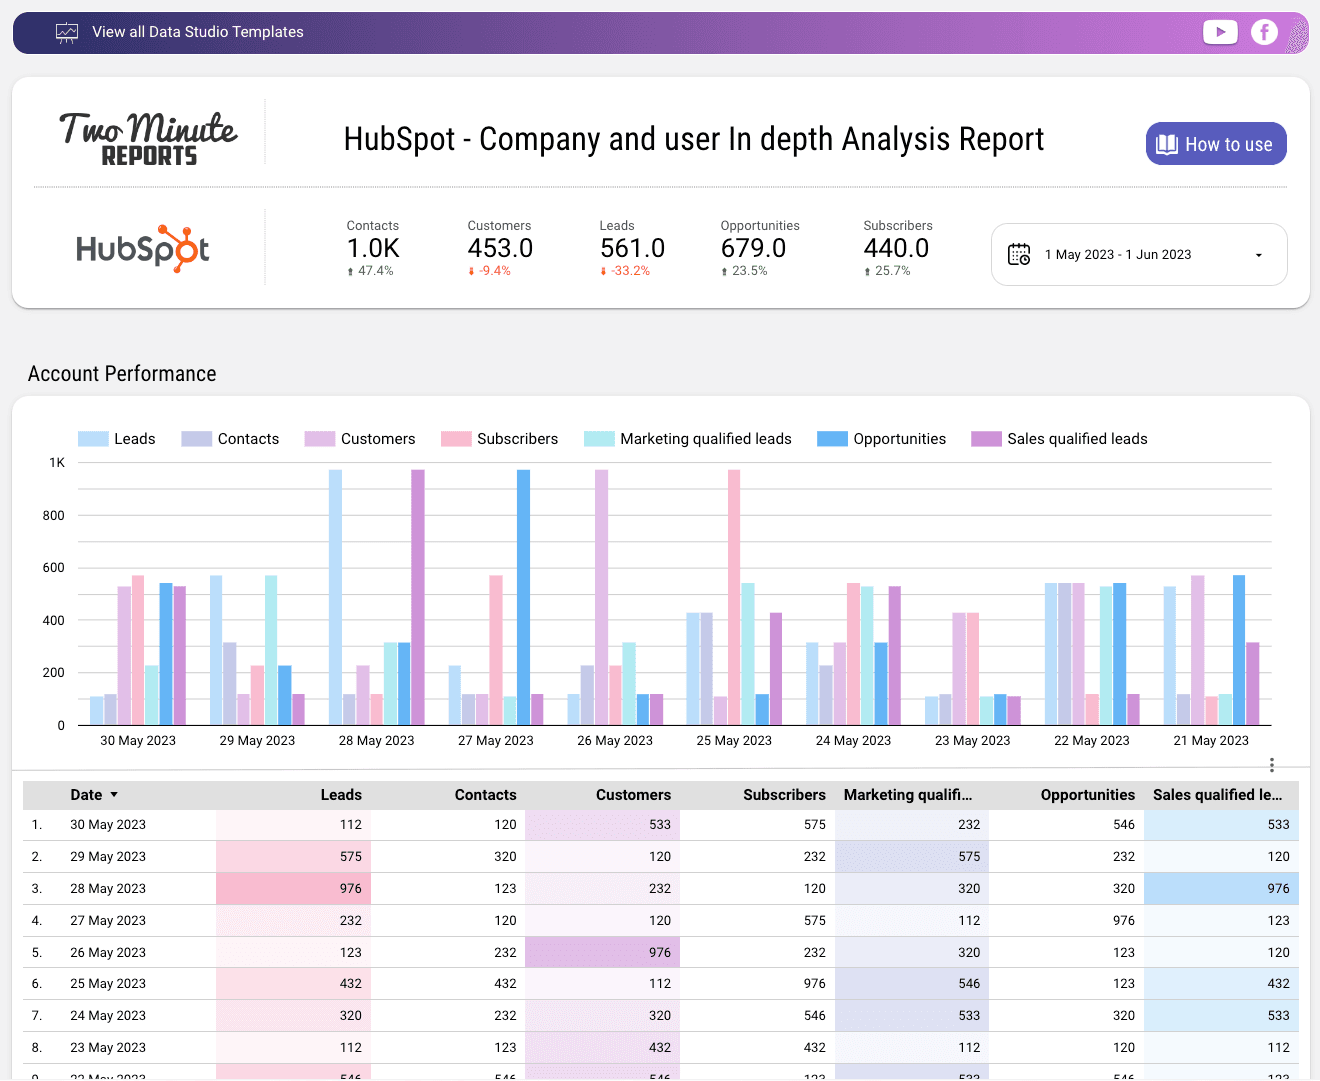 HubSpot - Company and User in depth Analysis Report